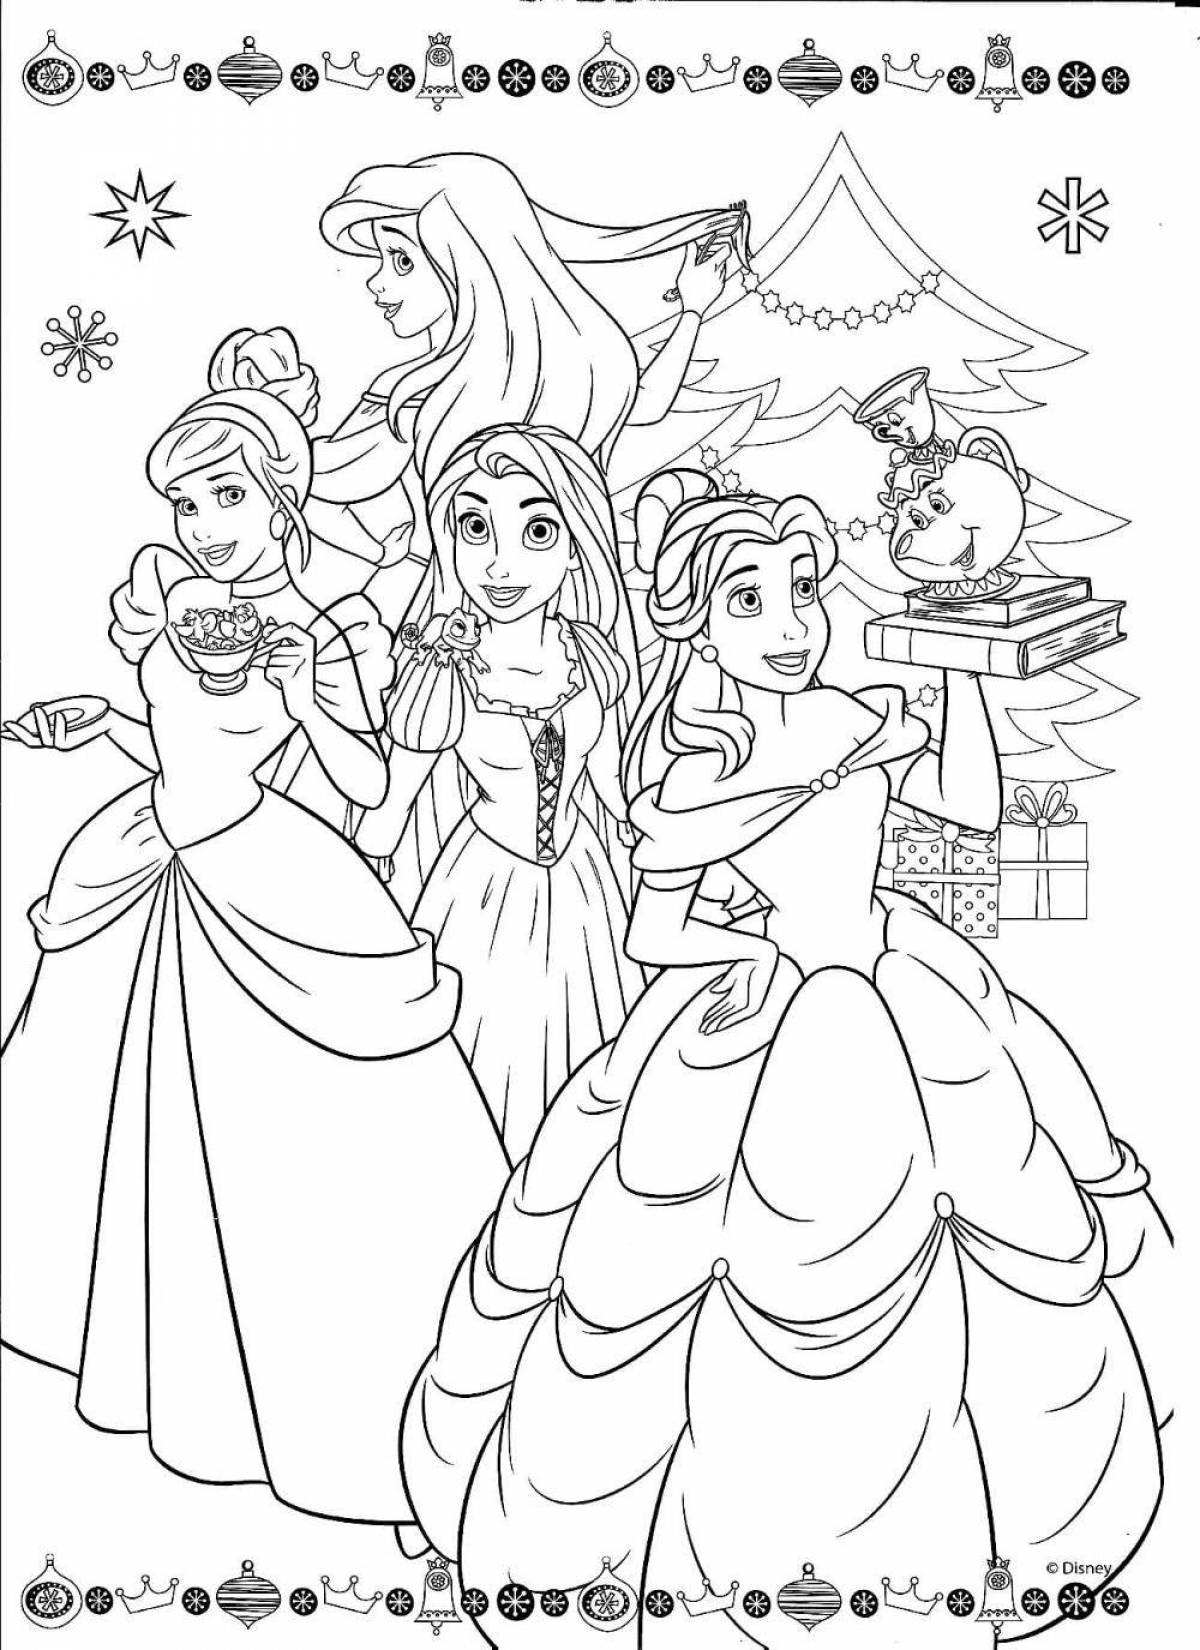 Disney's gorgeous Christmas coloring book